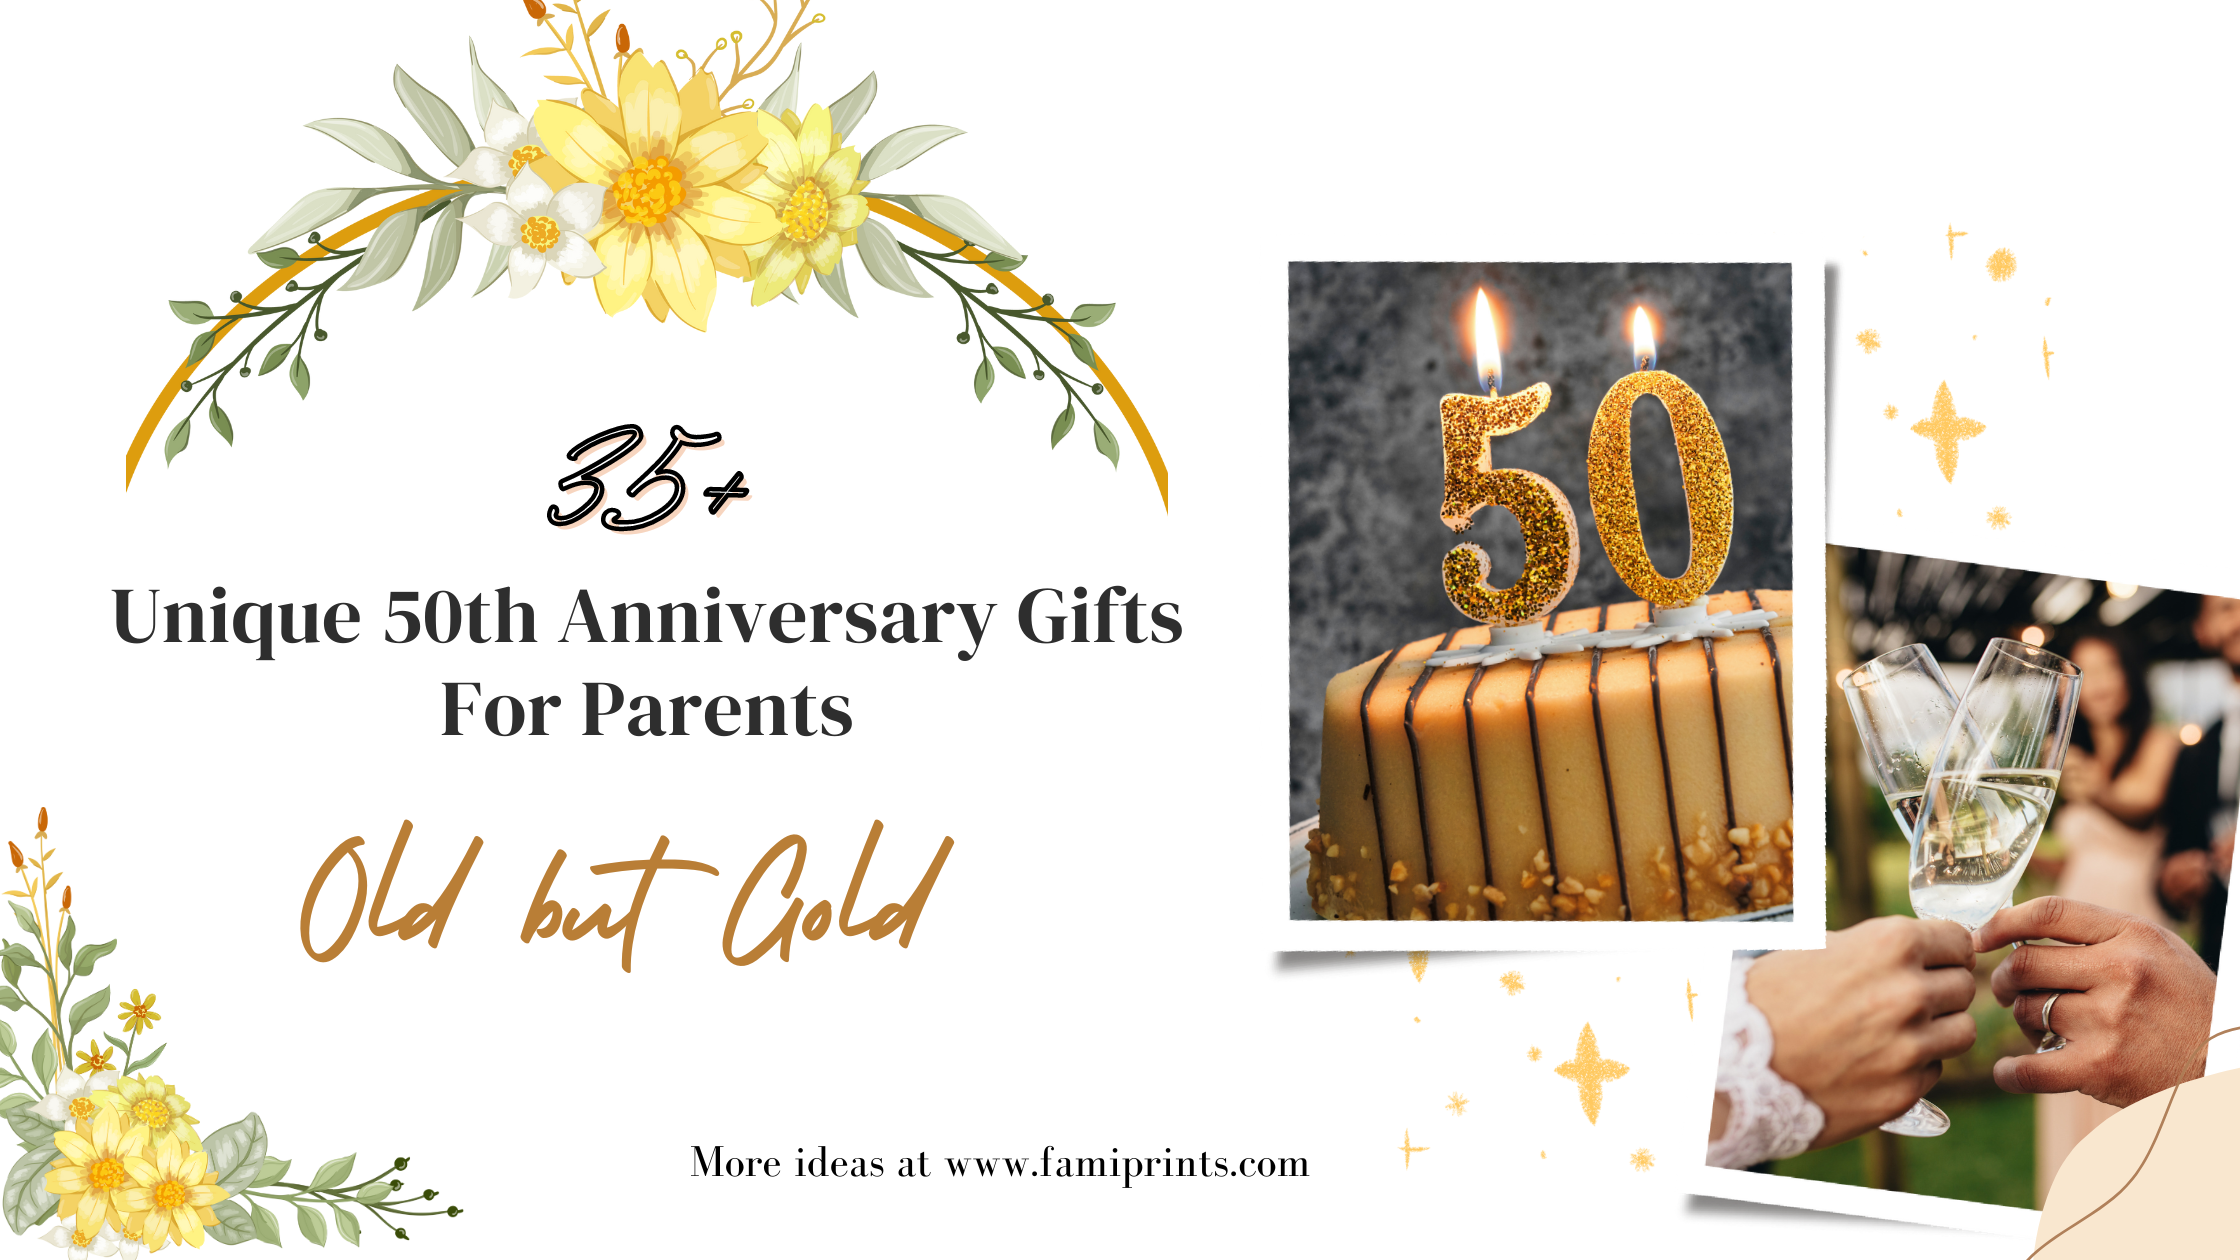 12 Wedding Anniversary Gifts Ideas for Parents 2022 | Cadbury Gifting India